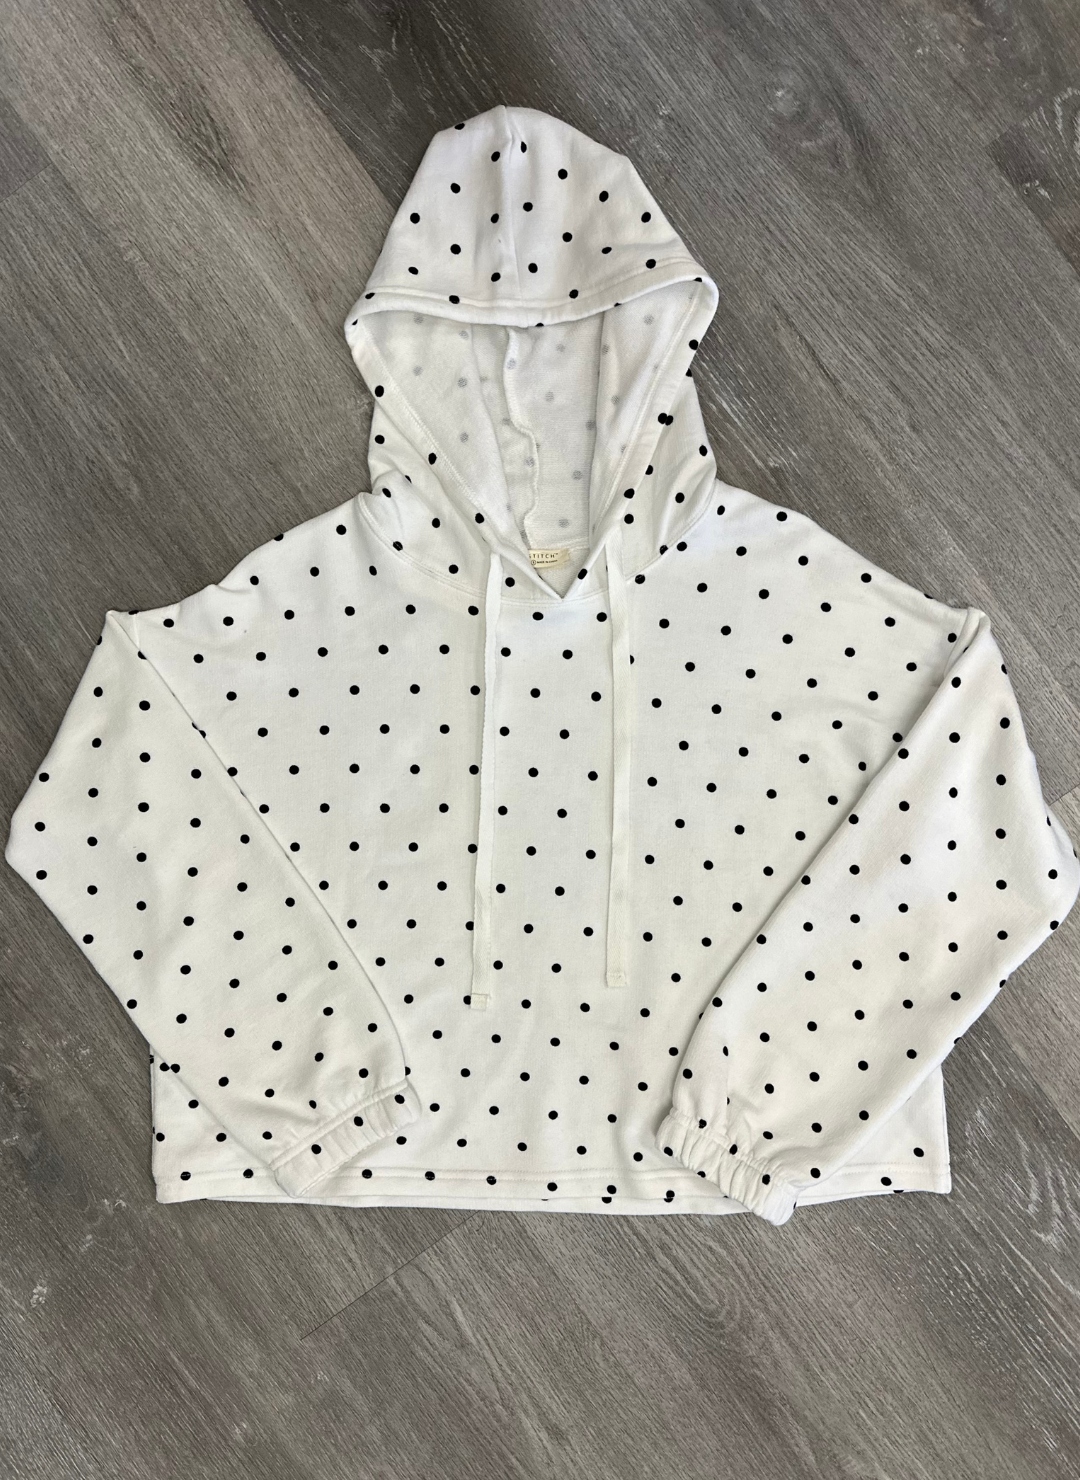 Full front view of the LS Polka Dot Princess Pullover showing the hoodie, strings , cuffs on the sleeve, and polka dot pattern on the pullover.